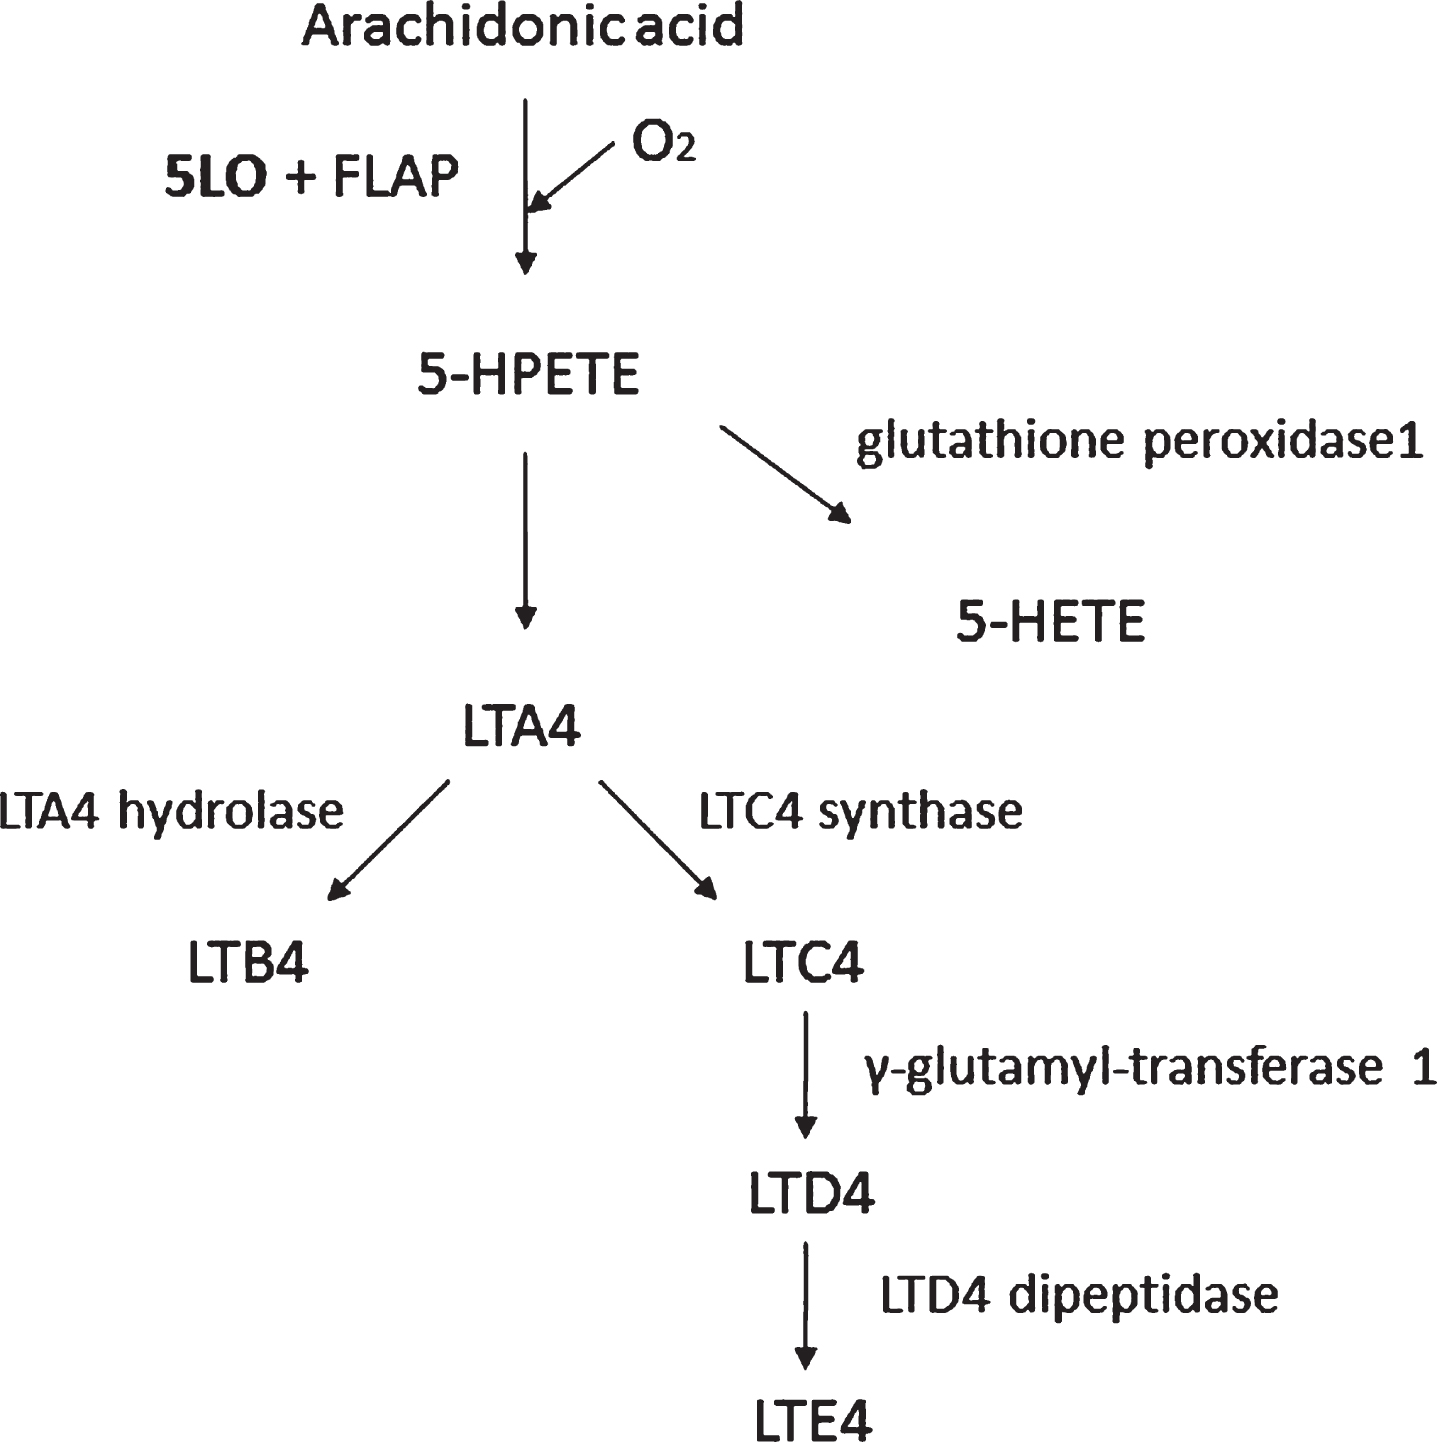 The 5LO pathway. 5LO activating protein (FLAP), 5-hydro-peroxyeicosatetraenoic acid (5-HPETE), 5-hydroxyeicosatetra-enoic acid (5-HETE), leukotriene A4 (LTA4), leukotriene B4 (LTB4), leukotriene C4 (LTC4), leukotriene D4 (LTD4), and leukotriene E4 (LTE4). The 5LO converts arachidonic acid to 5-HPETE with the aid of FLAP. 5-HPETE is then converted to 5-HETE or LTA4. Finally, LTA4 can be metabolized via a hydrolase to LTB4 or a synthase to LTC4, which via the γ-glutamyl-transferase can ultimately be transformed into LTE4 by the action of a specific dipeptidase.